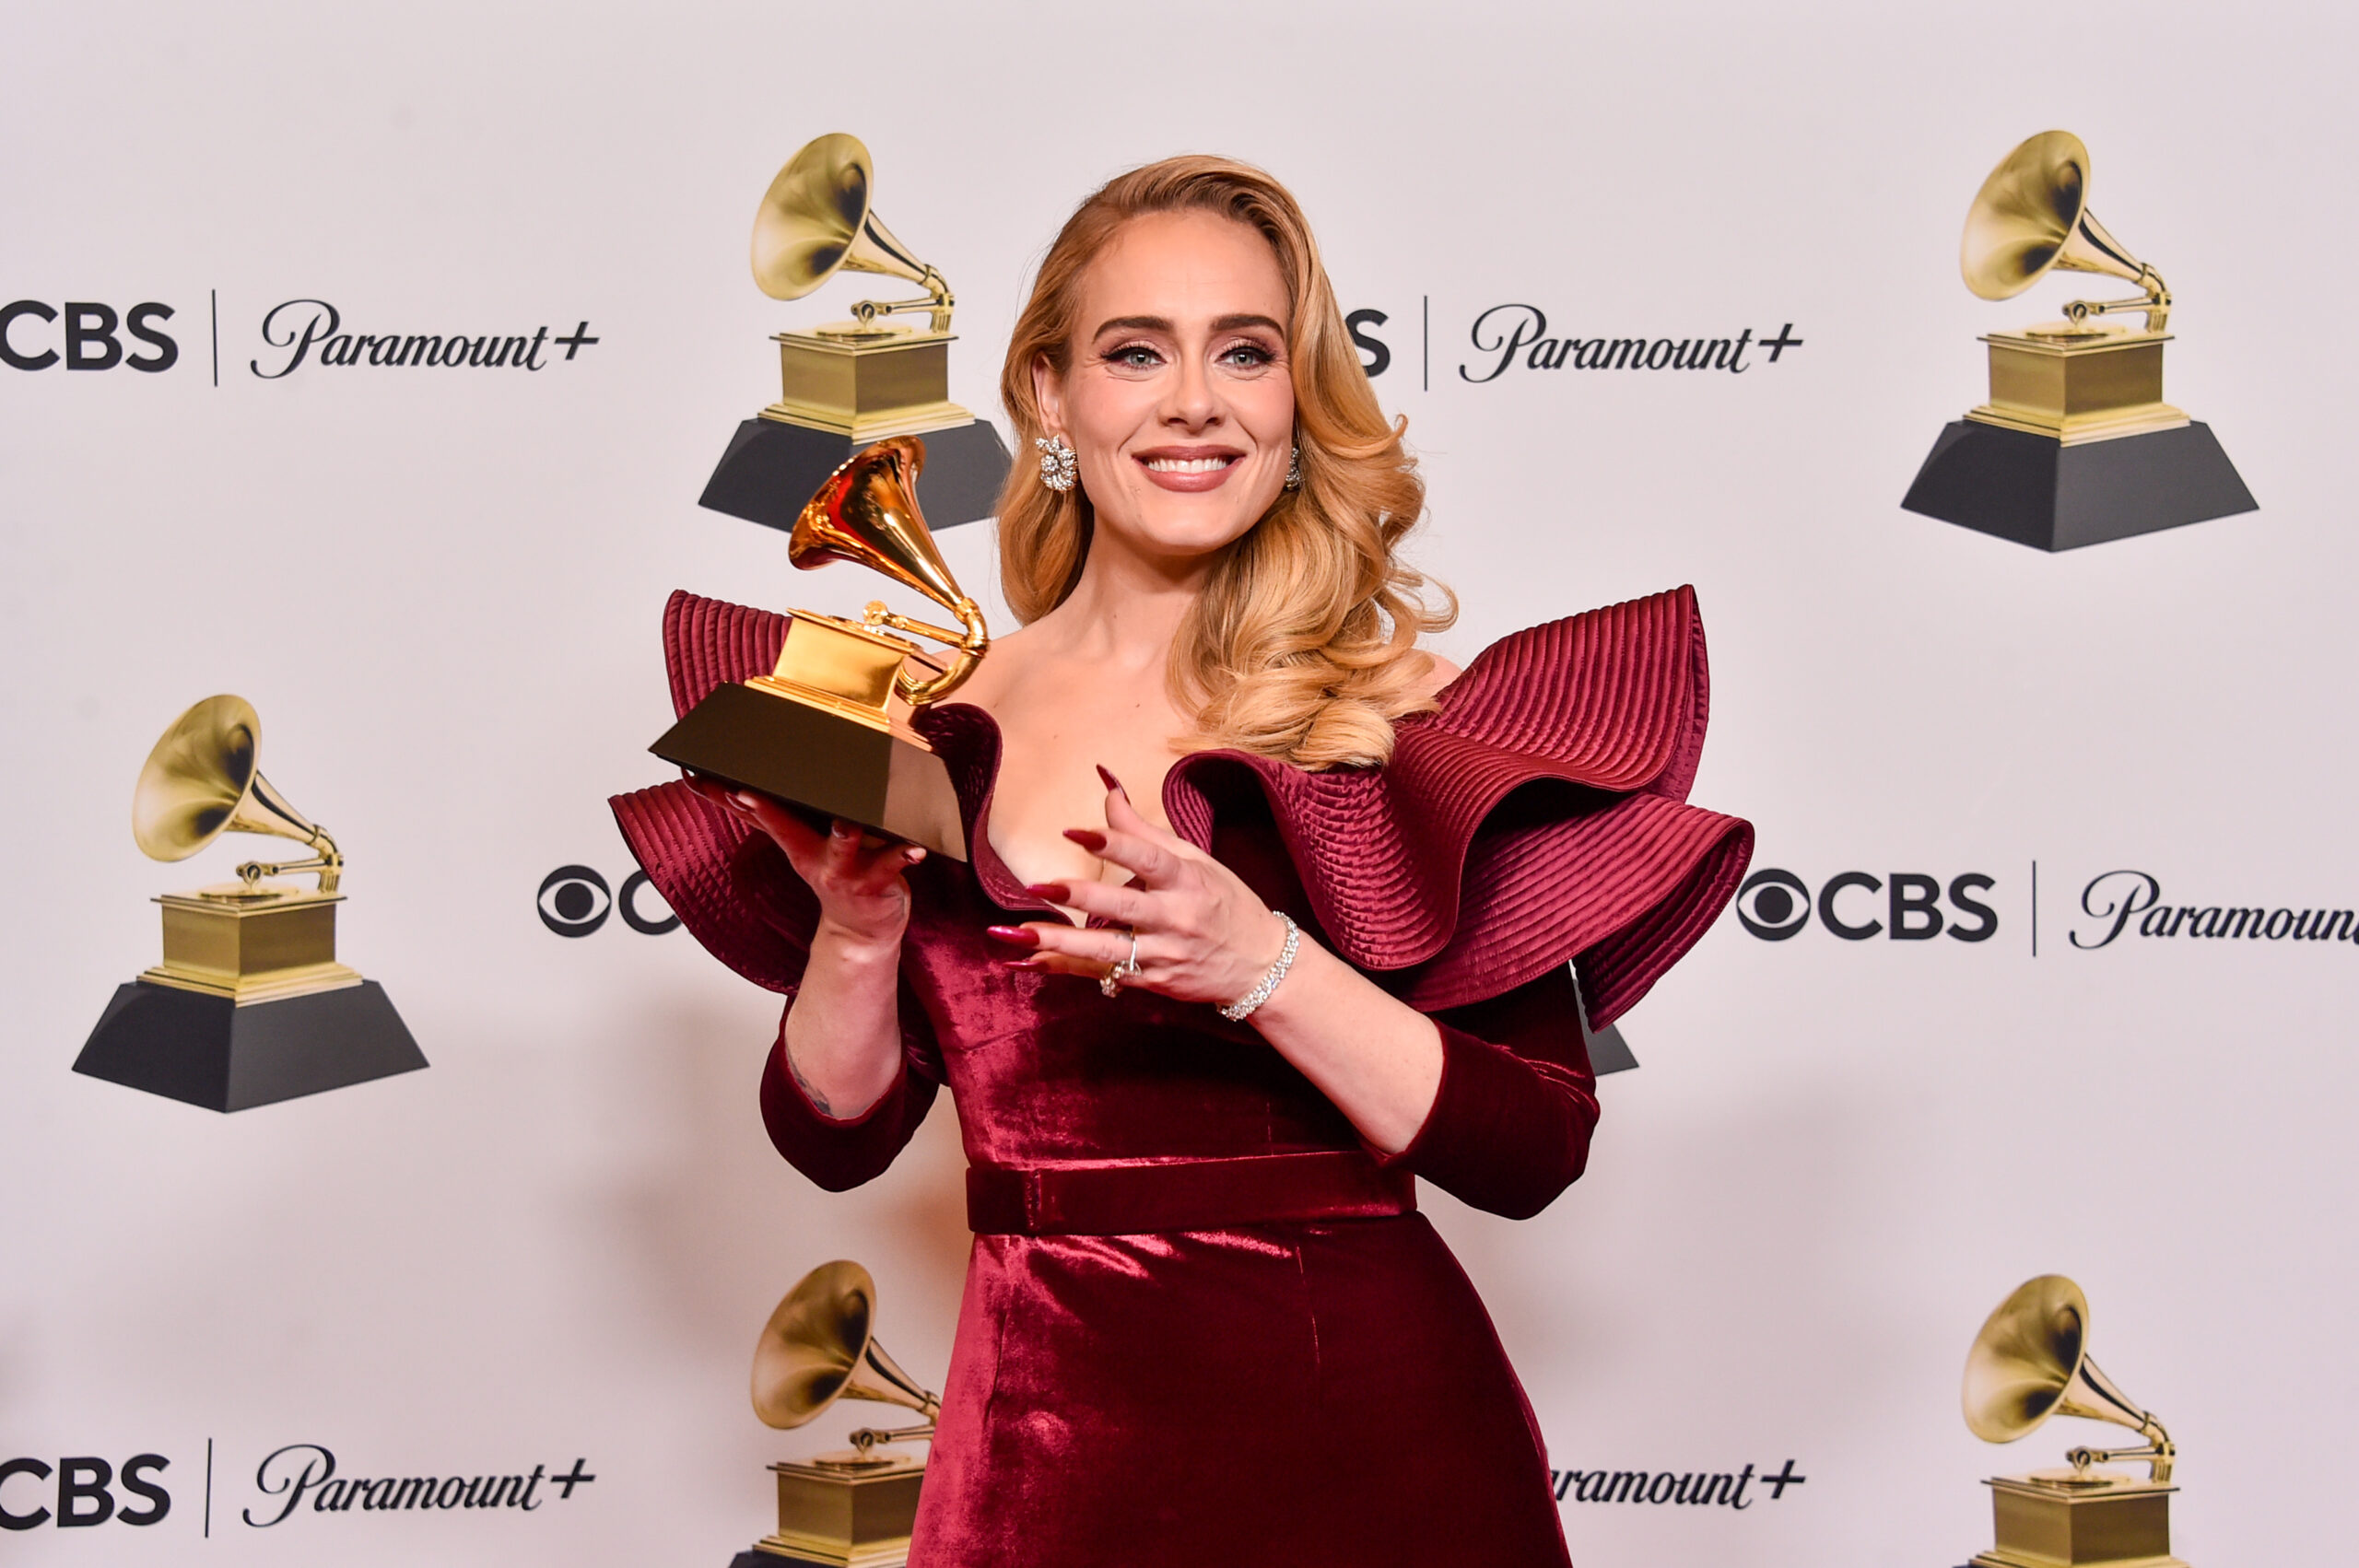 Dressed in a stylish red designer dress, singer Adele poses for the cameras with her award at the 65th GRAMMY Awards.